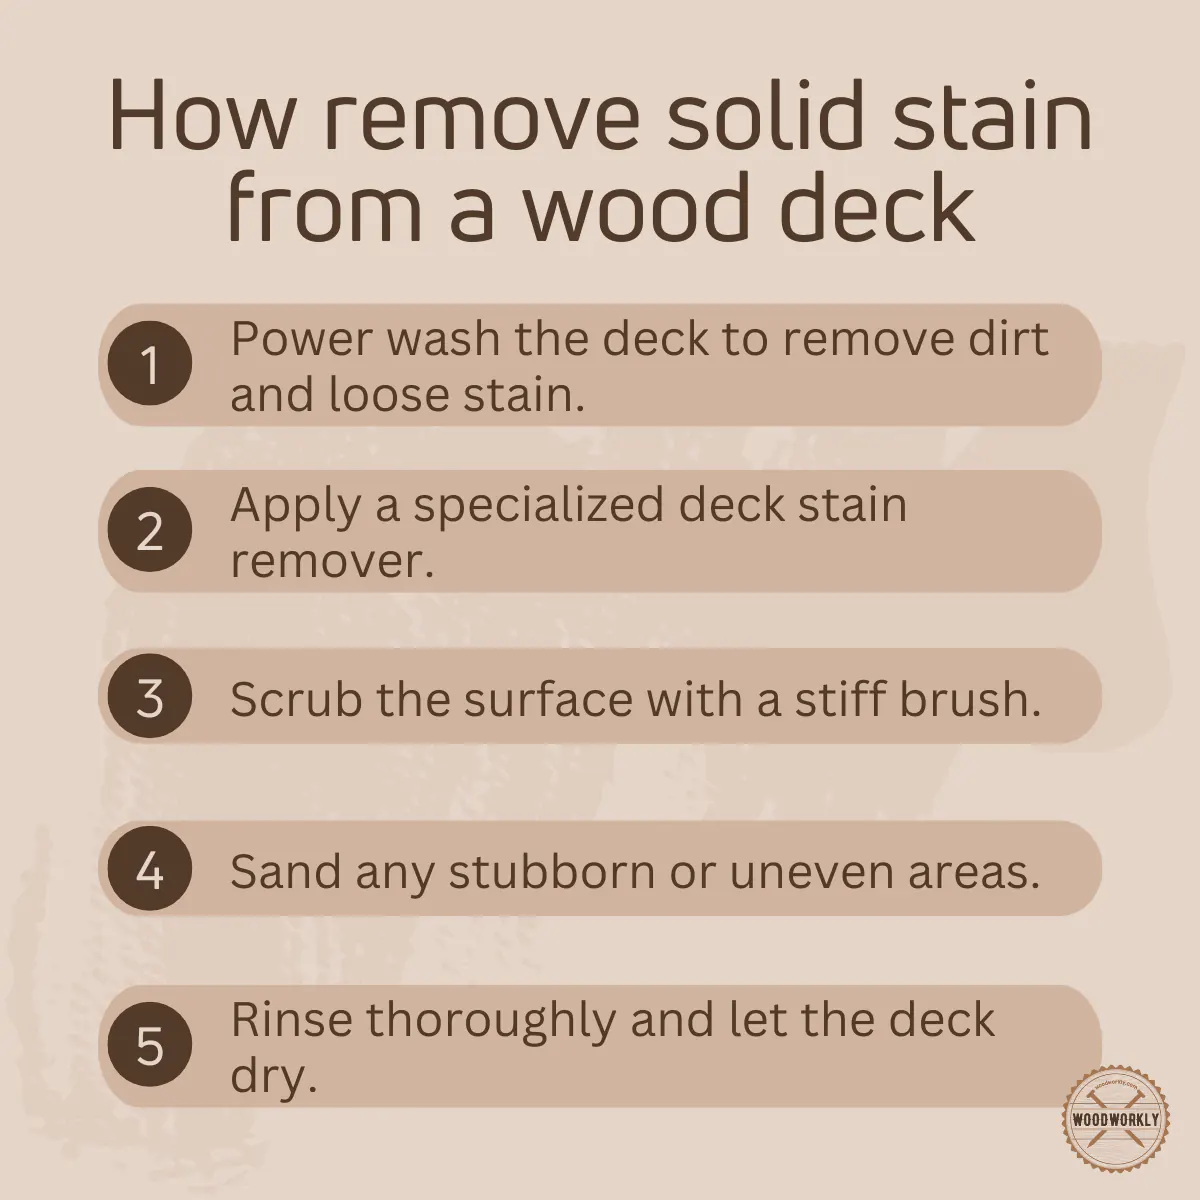 How remove solid stain from a wood deck